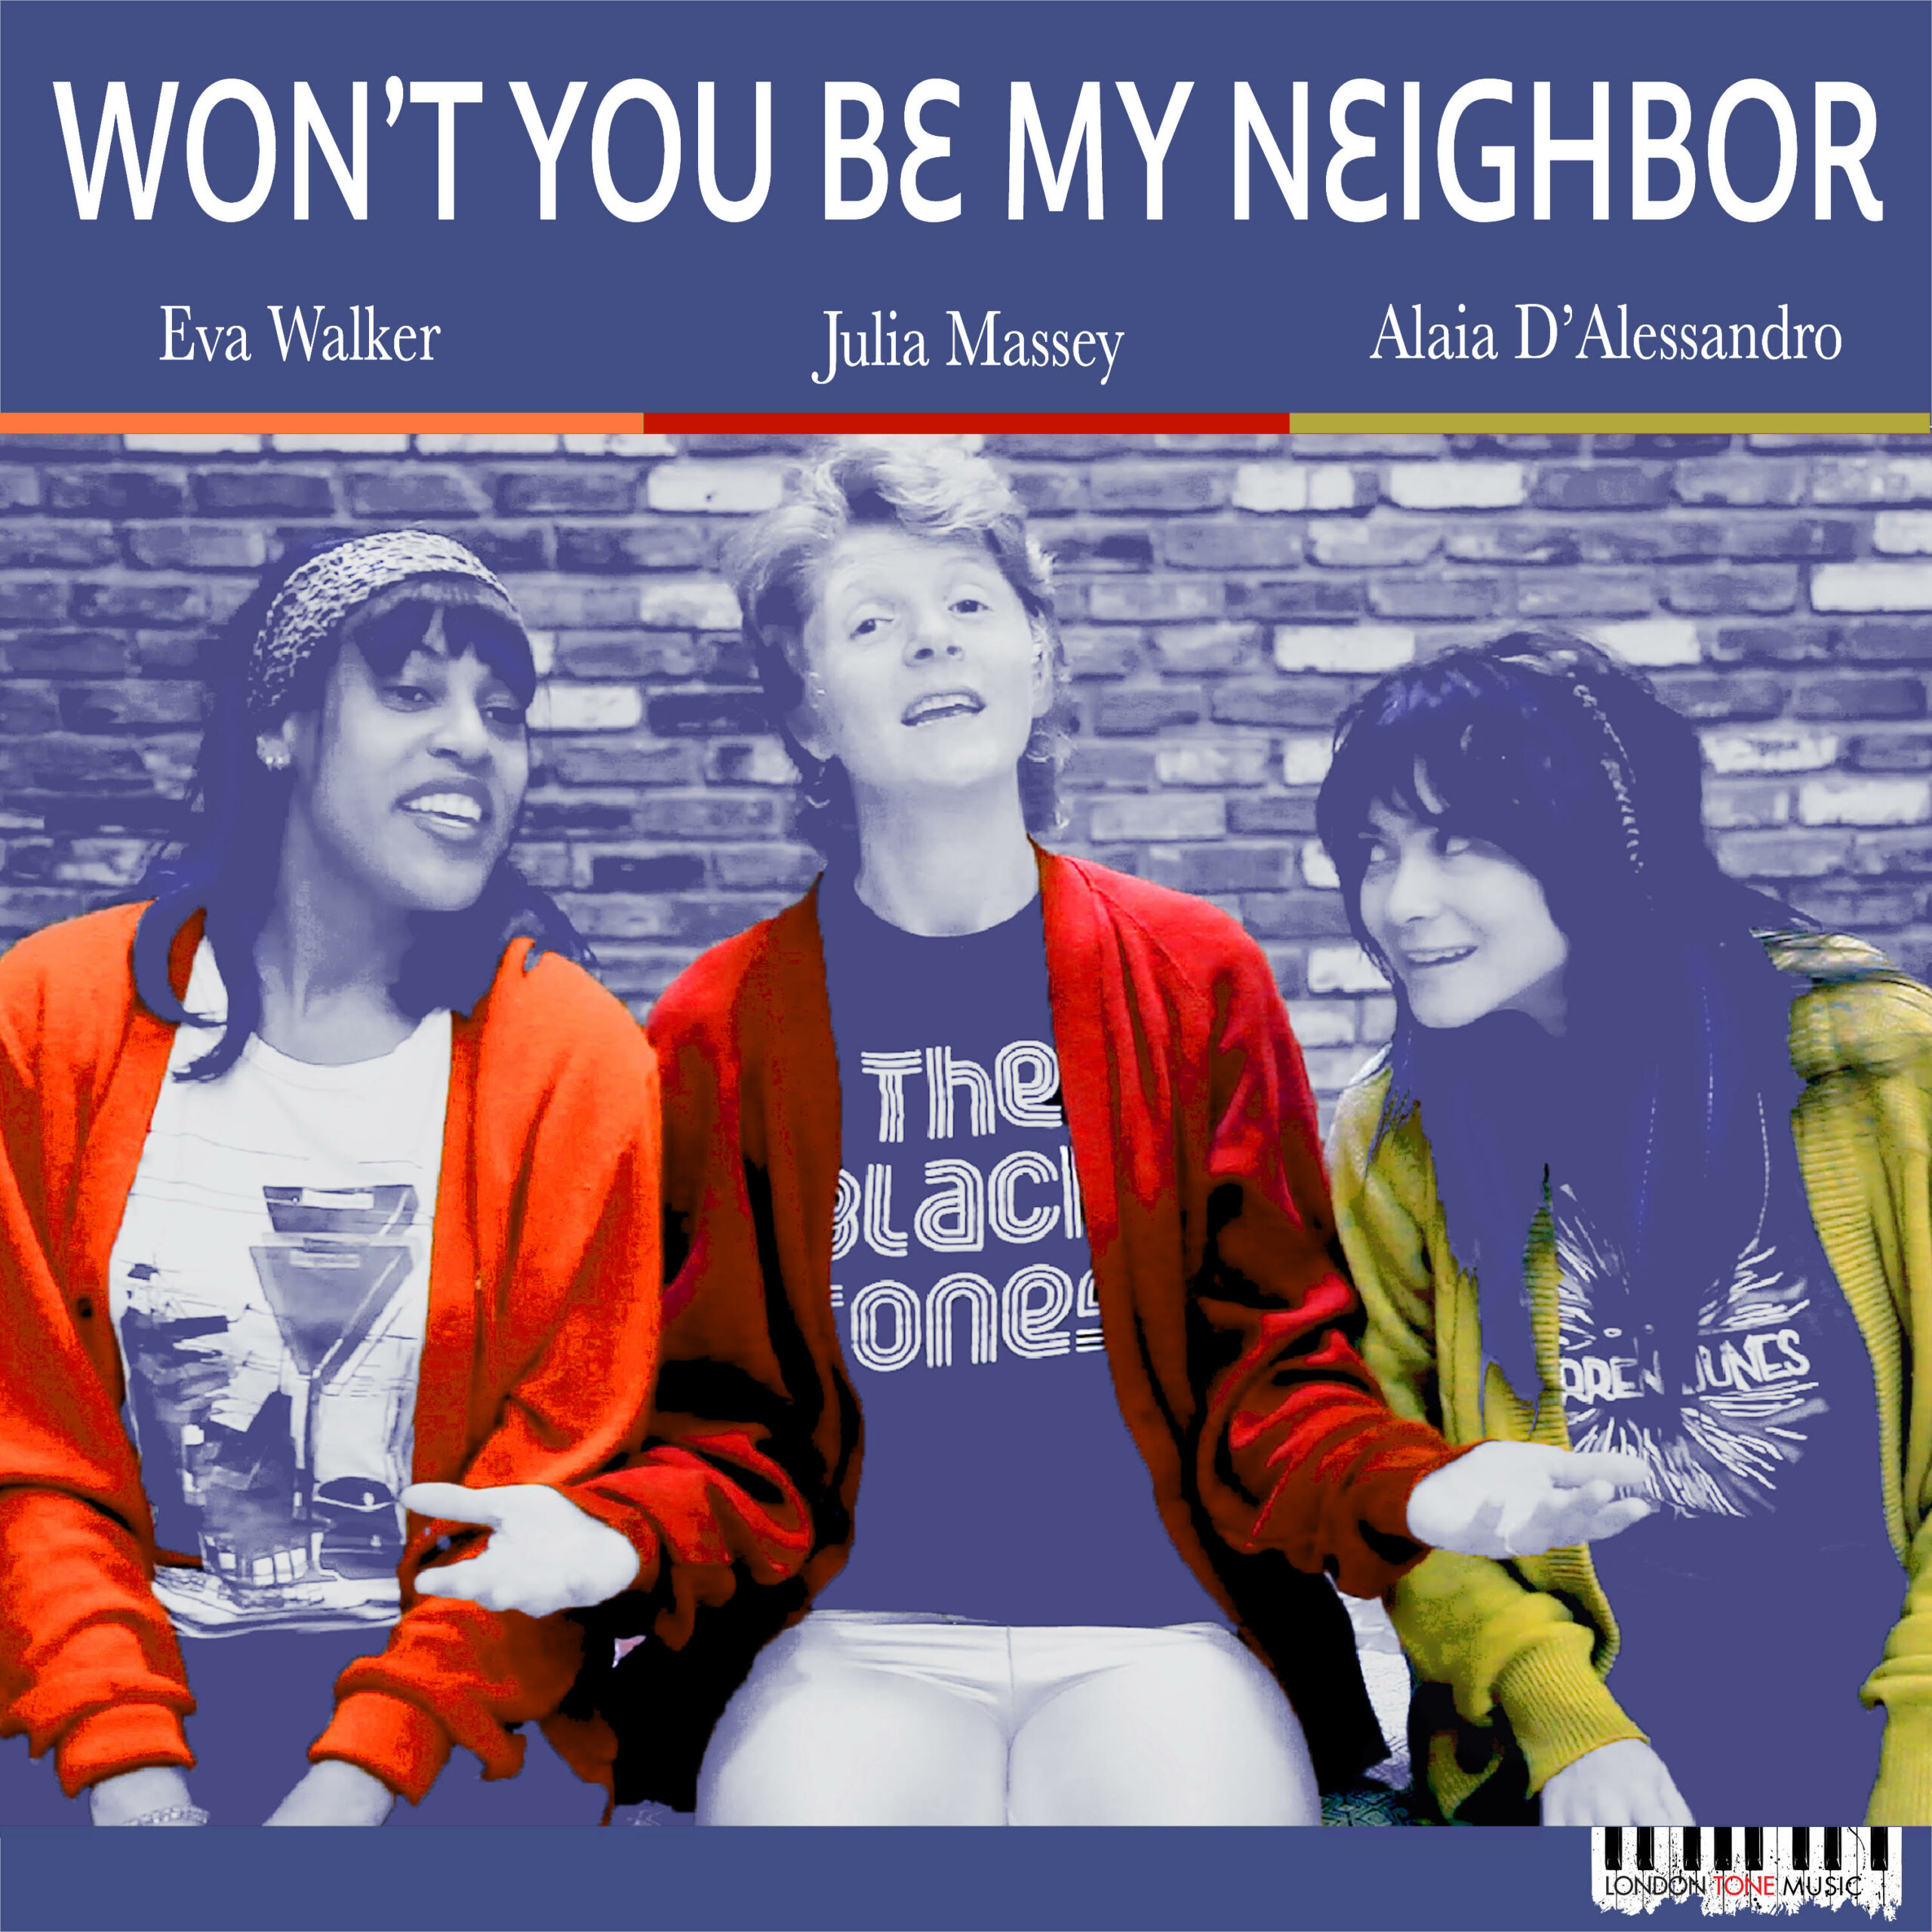 Artist Home Premiere: “Won’t You Be My Neighbor” by Eva Walker, Alaia D’Alessandro, and Julia Massey